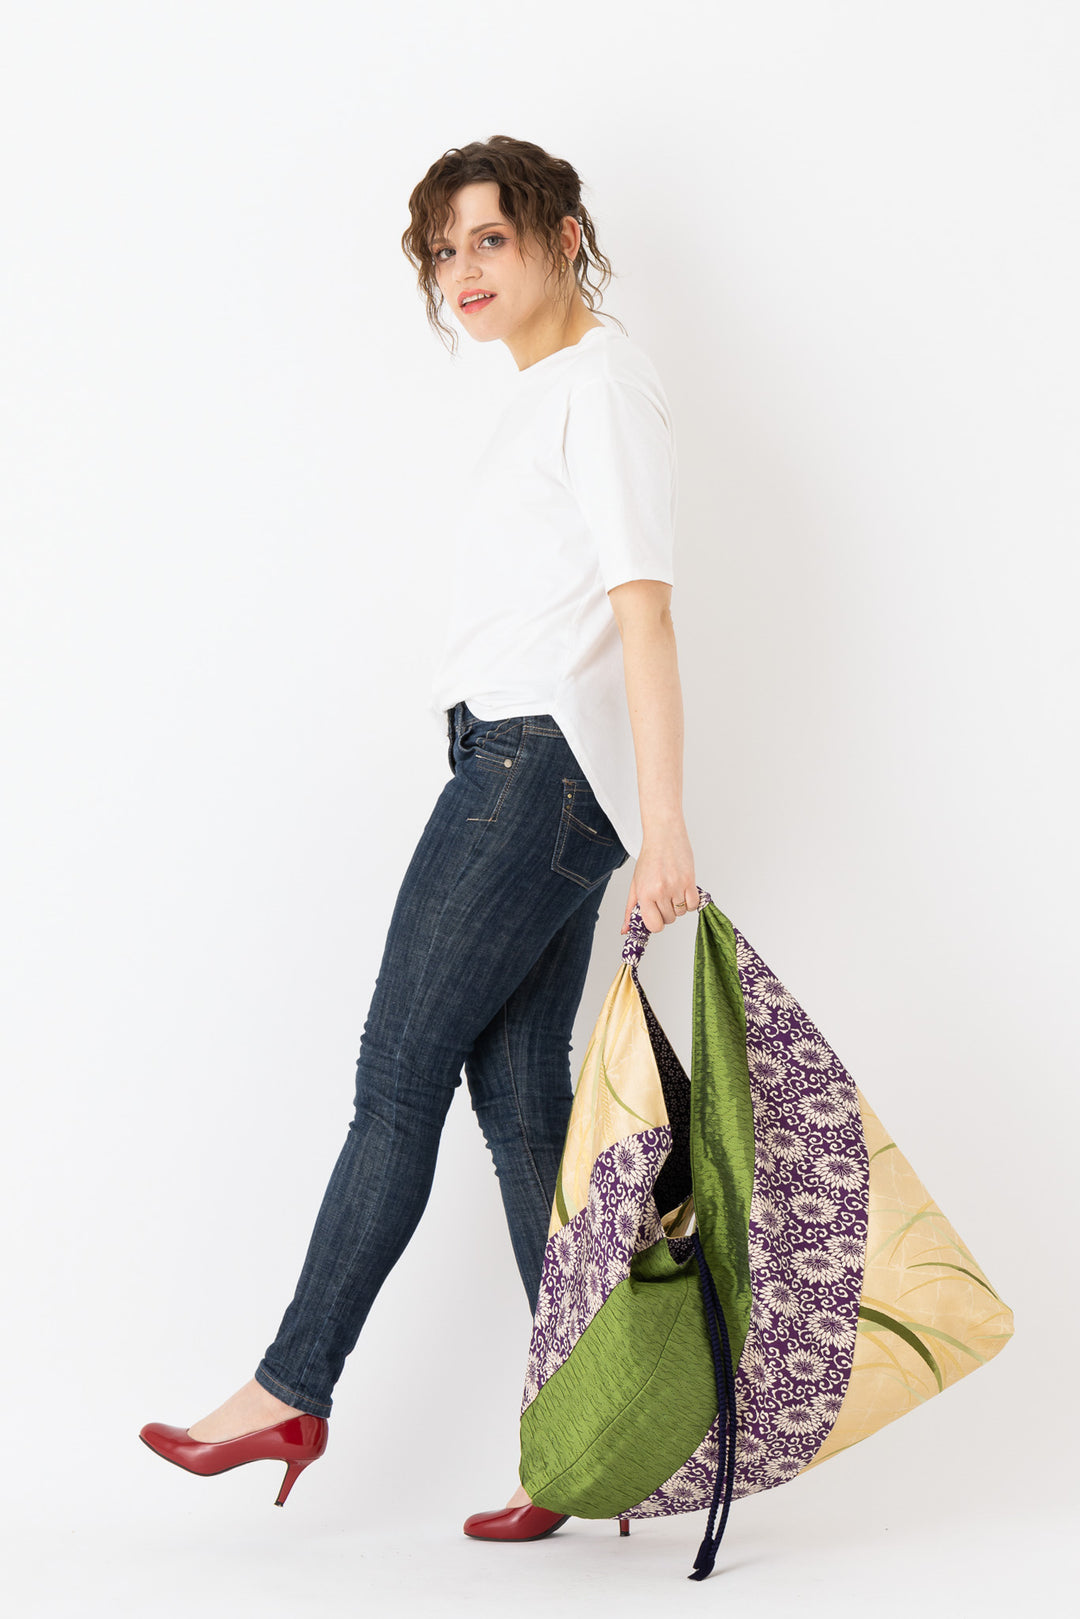 A woman is carrying a stunning embroidered boho bag, showcasing the intricate details on this large tote bag. This large boho bag elevates her style and is an example of embroidered tote bag styling.  